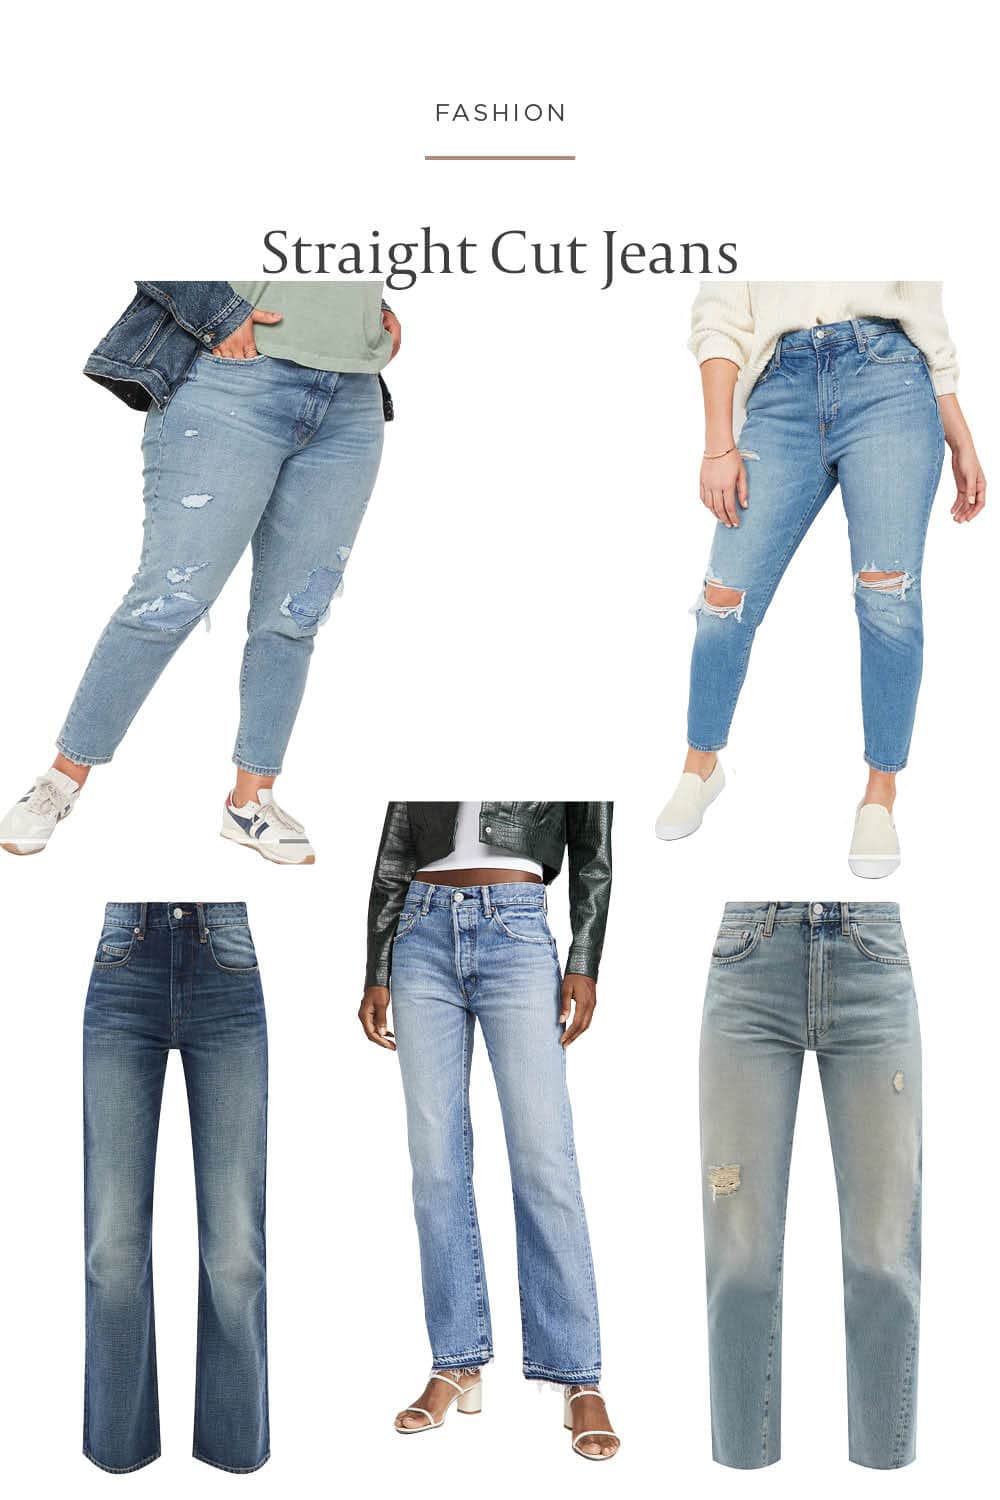 Trending Jeans - try this straight leg cut